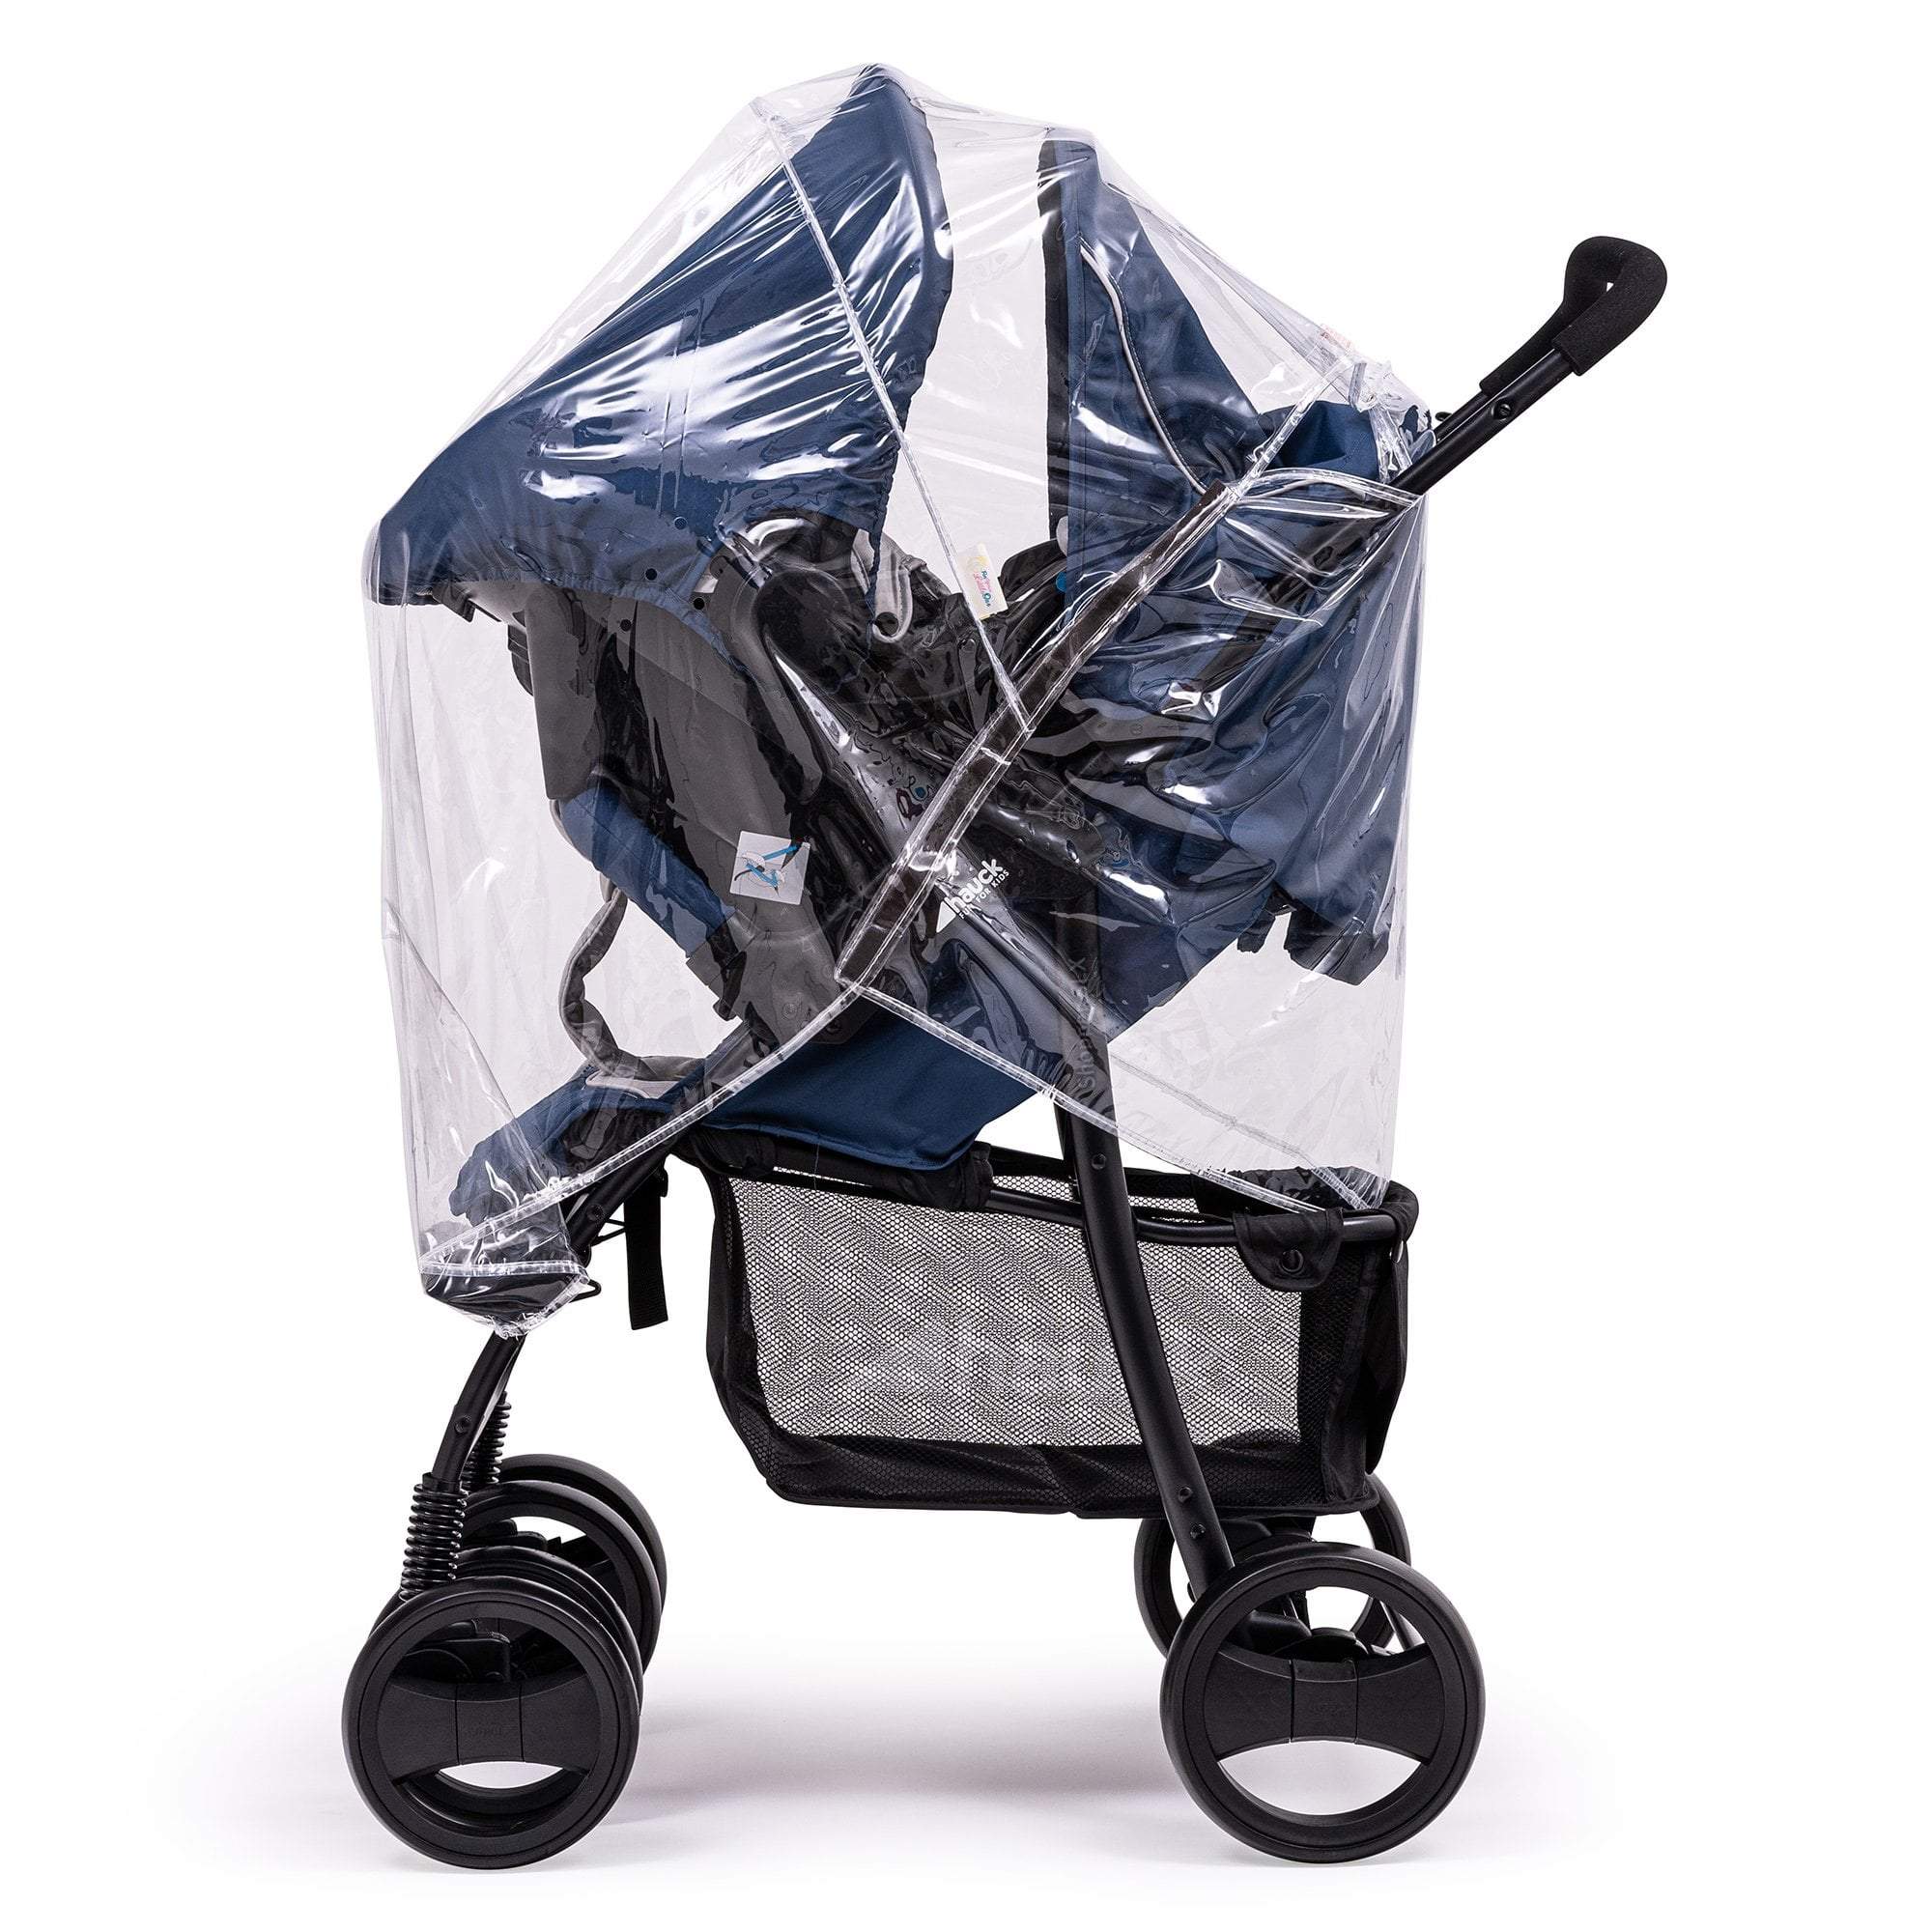 Travel System Raincover Compatible with Bebe Confort - Fits All Models - For Your Little One